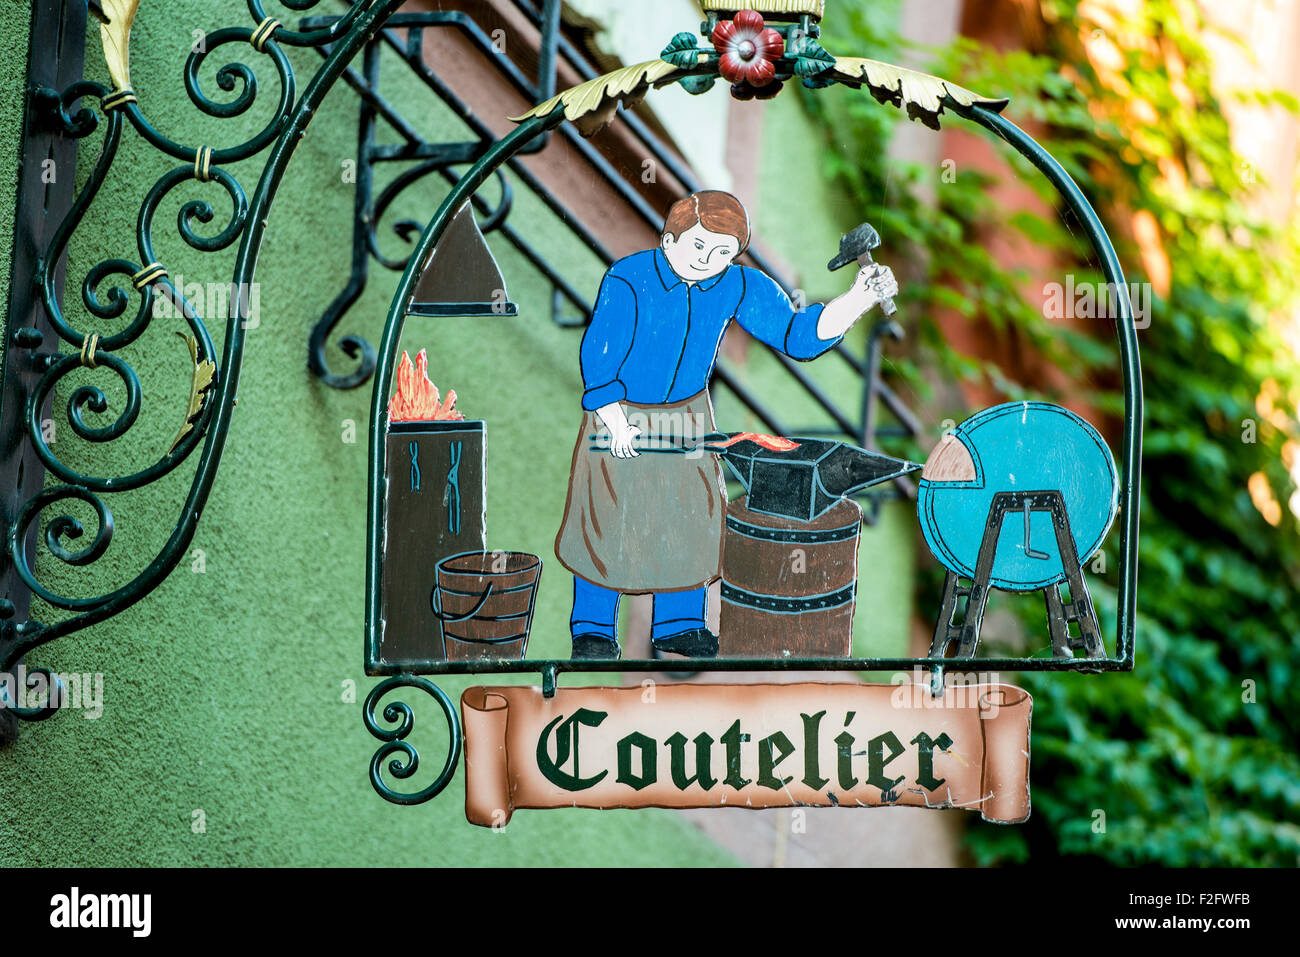 Signboard for a blacksmith, Riquewihr, Alsace, France Stock Photo